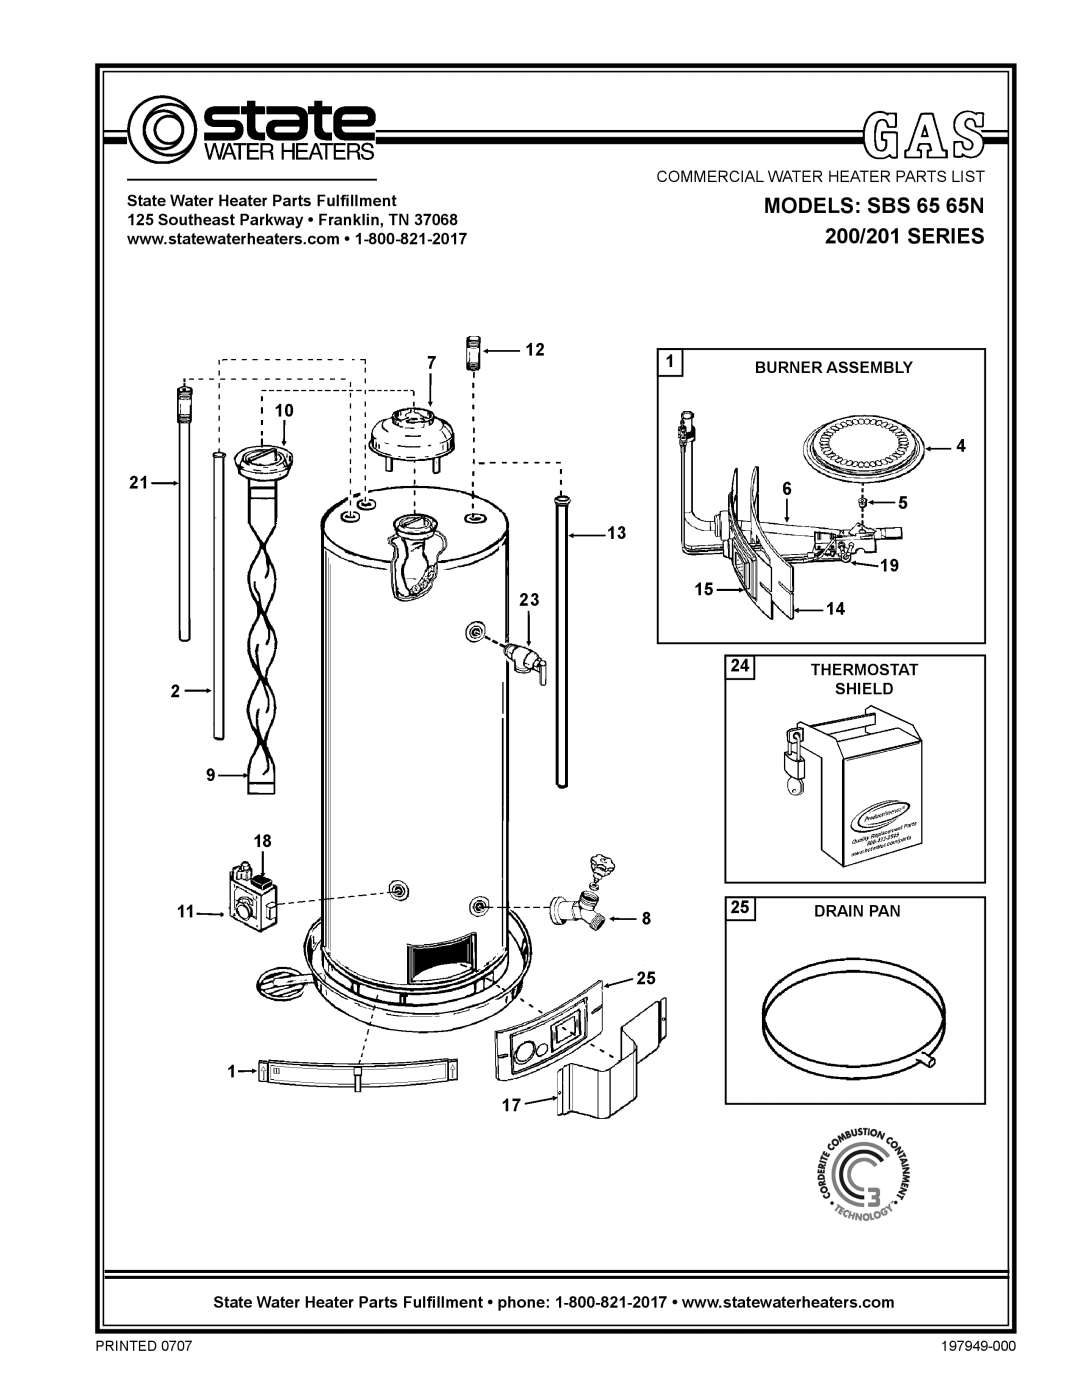 State Industries manual MODELS SBS 65 65N, 200/201 SERIES, Commercial Water Heater Parts List, Burner Assembly, Shield 